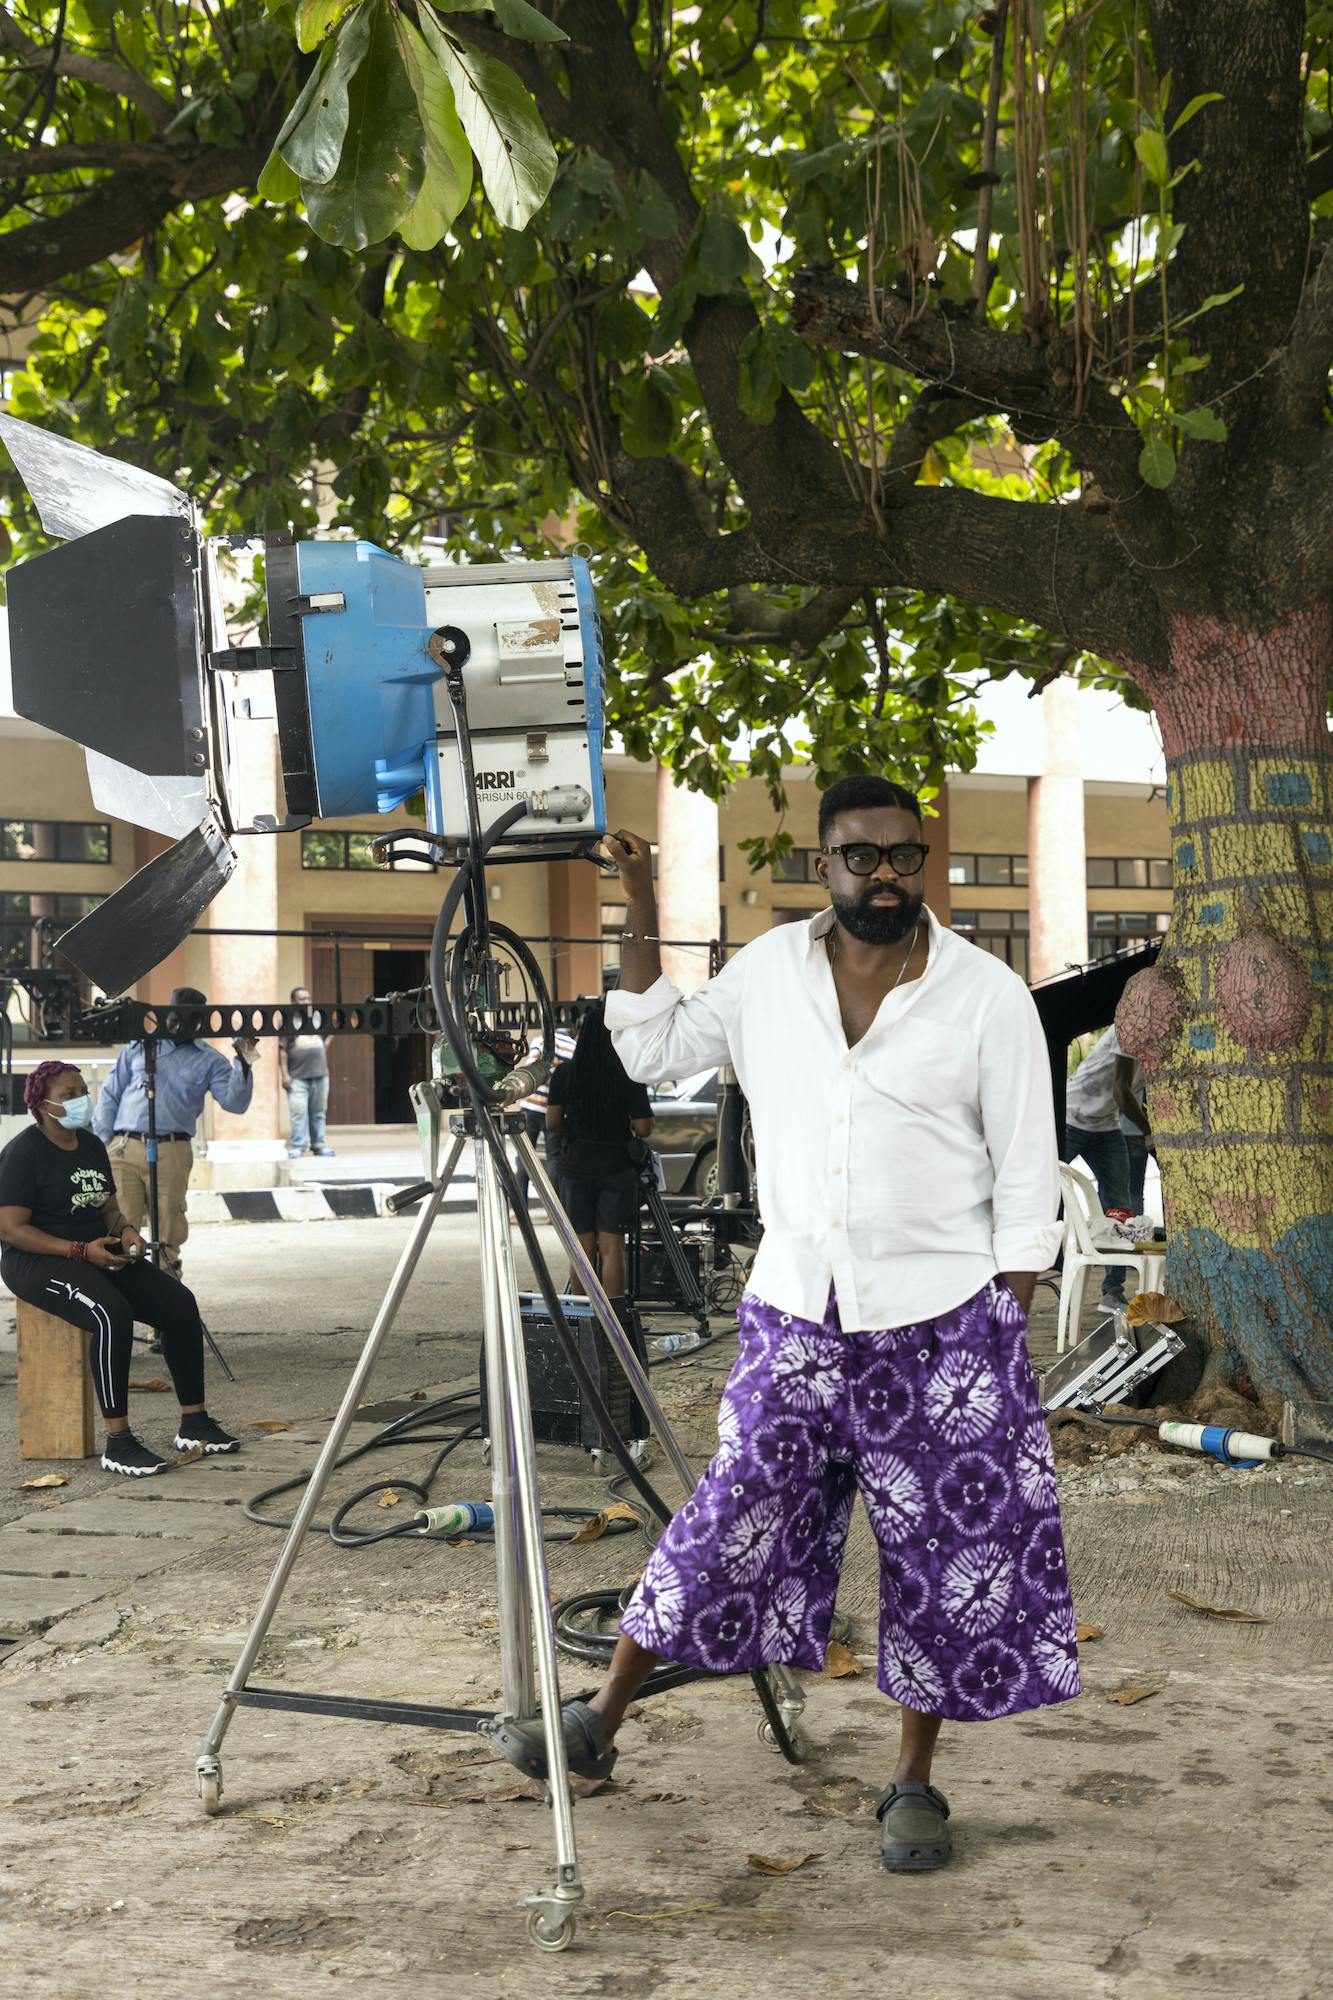 Kunle Afolayan wears a white shirt and purple patterned pants as he films outside. Behind him are masked crew members, equipment, and a leafy tree.